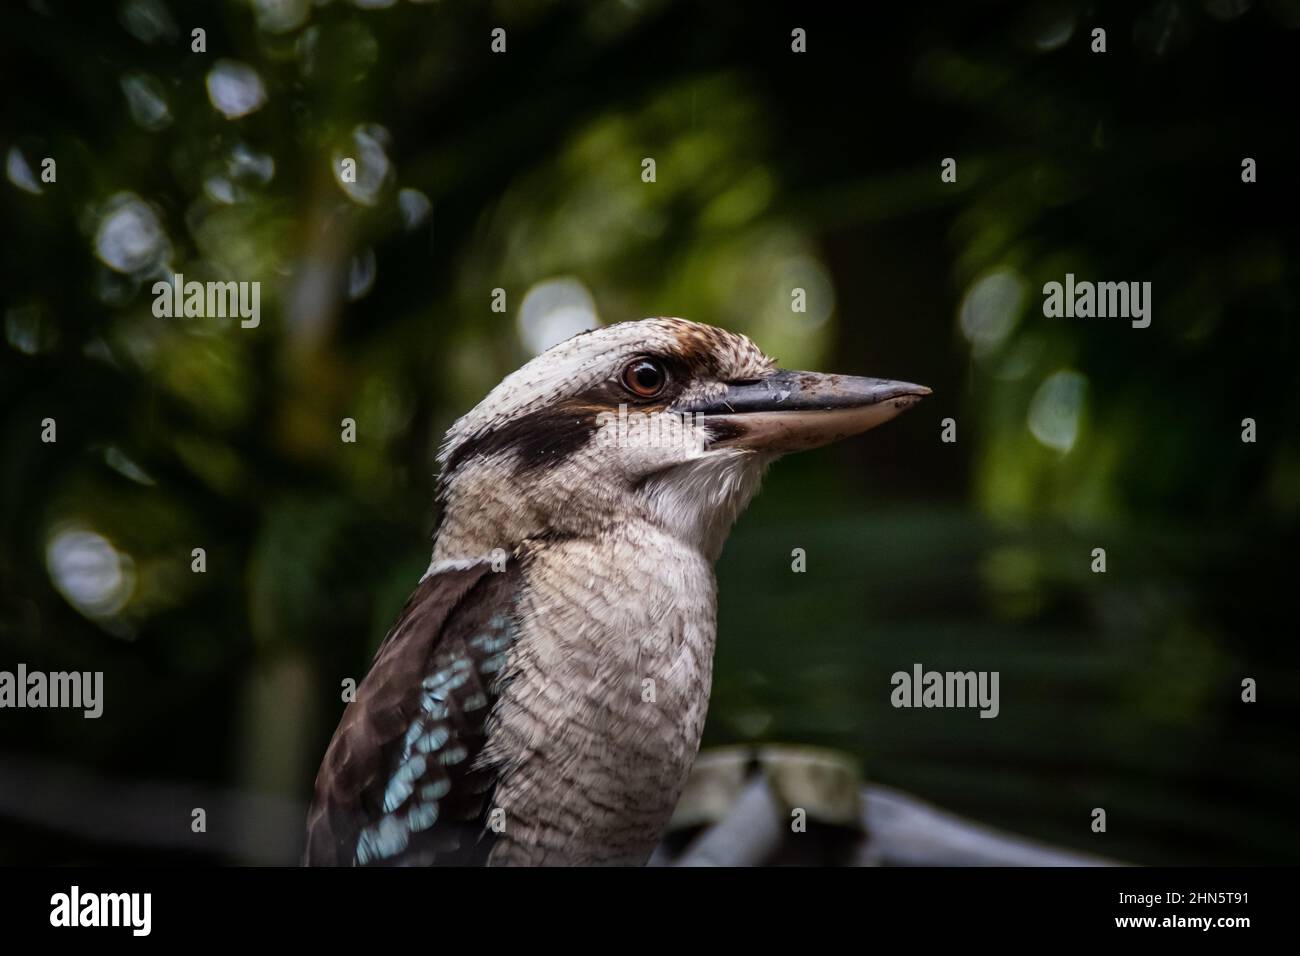 An Australian bird kookaburra standing and checking on surroundings and possibly preys for its hatchlings back at home Stock Photo